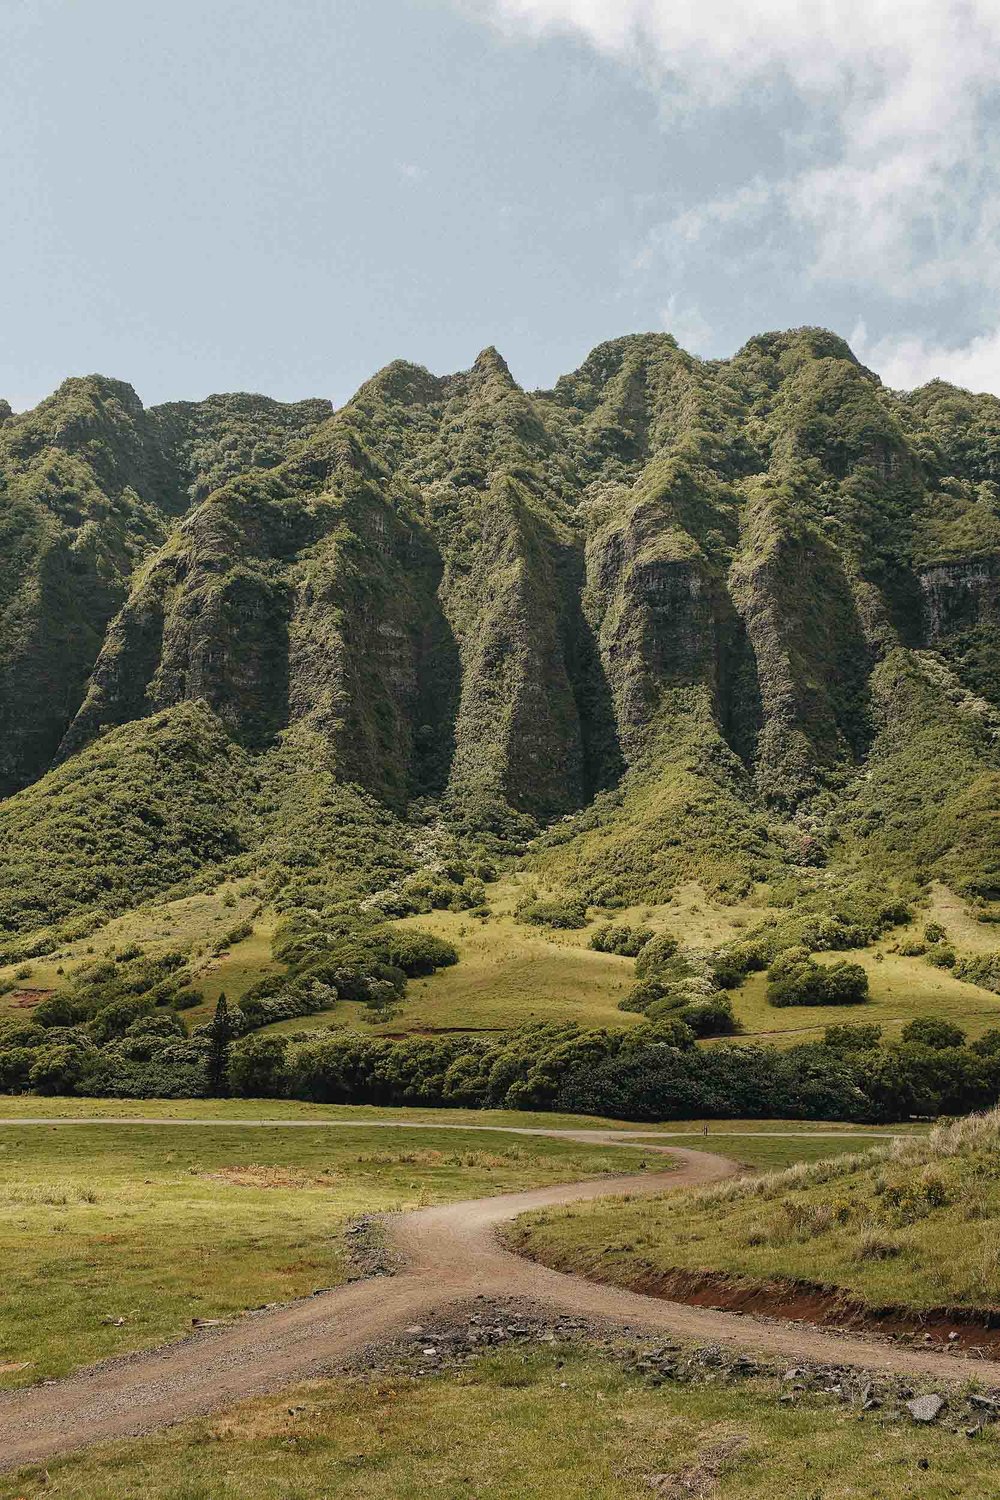 Jurassic Park Hawaii — a detailed guide (and review) to visiting Kualoa Ranch Oahu